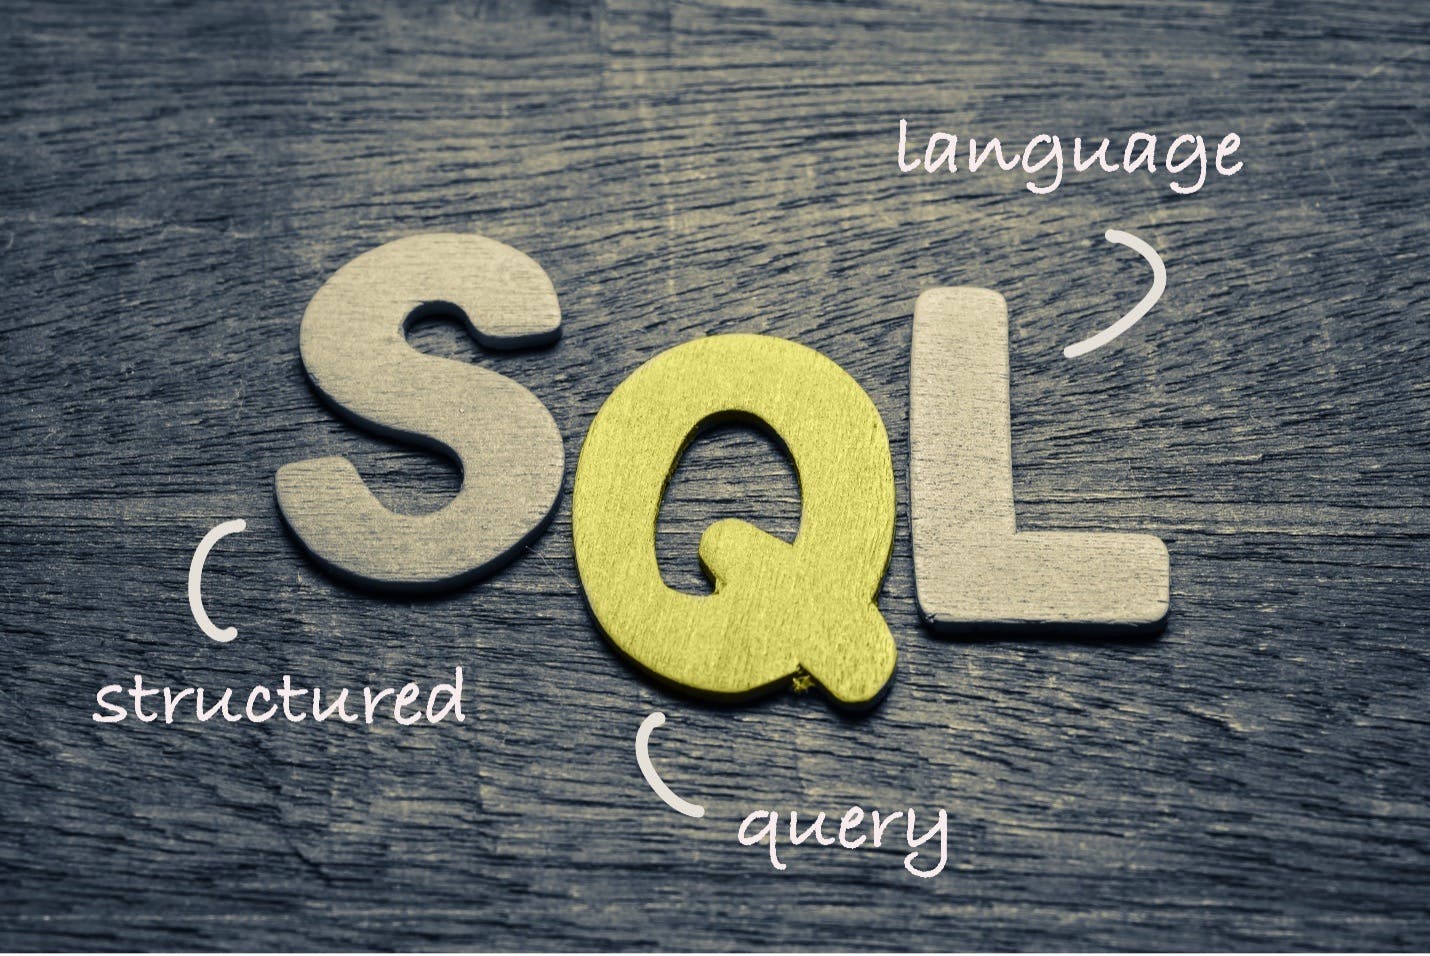 The letters SQL rest on a wooden background with the words "structured", "query", and "language" around them in this image for a blog about database normalization.